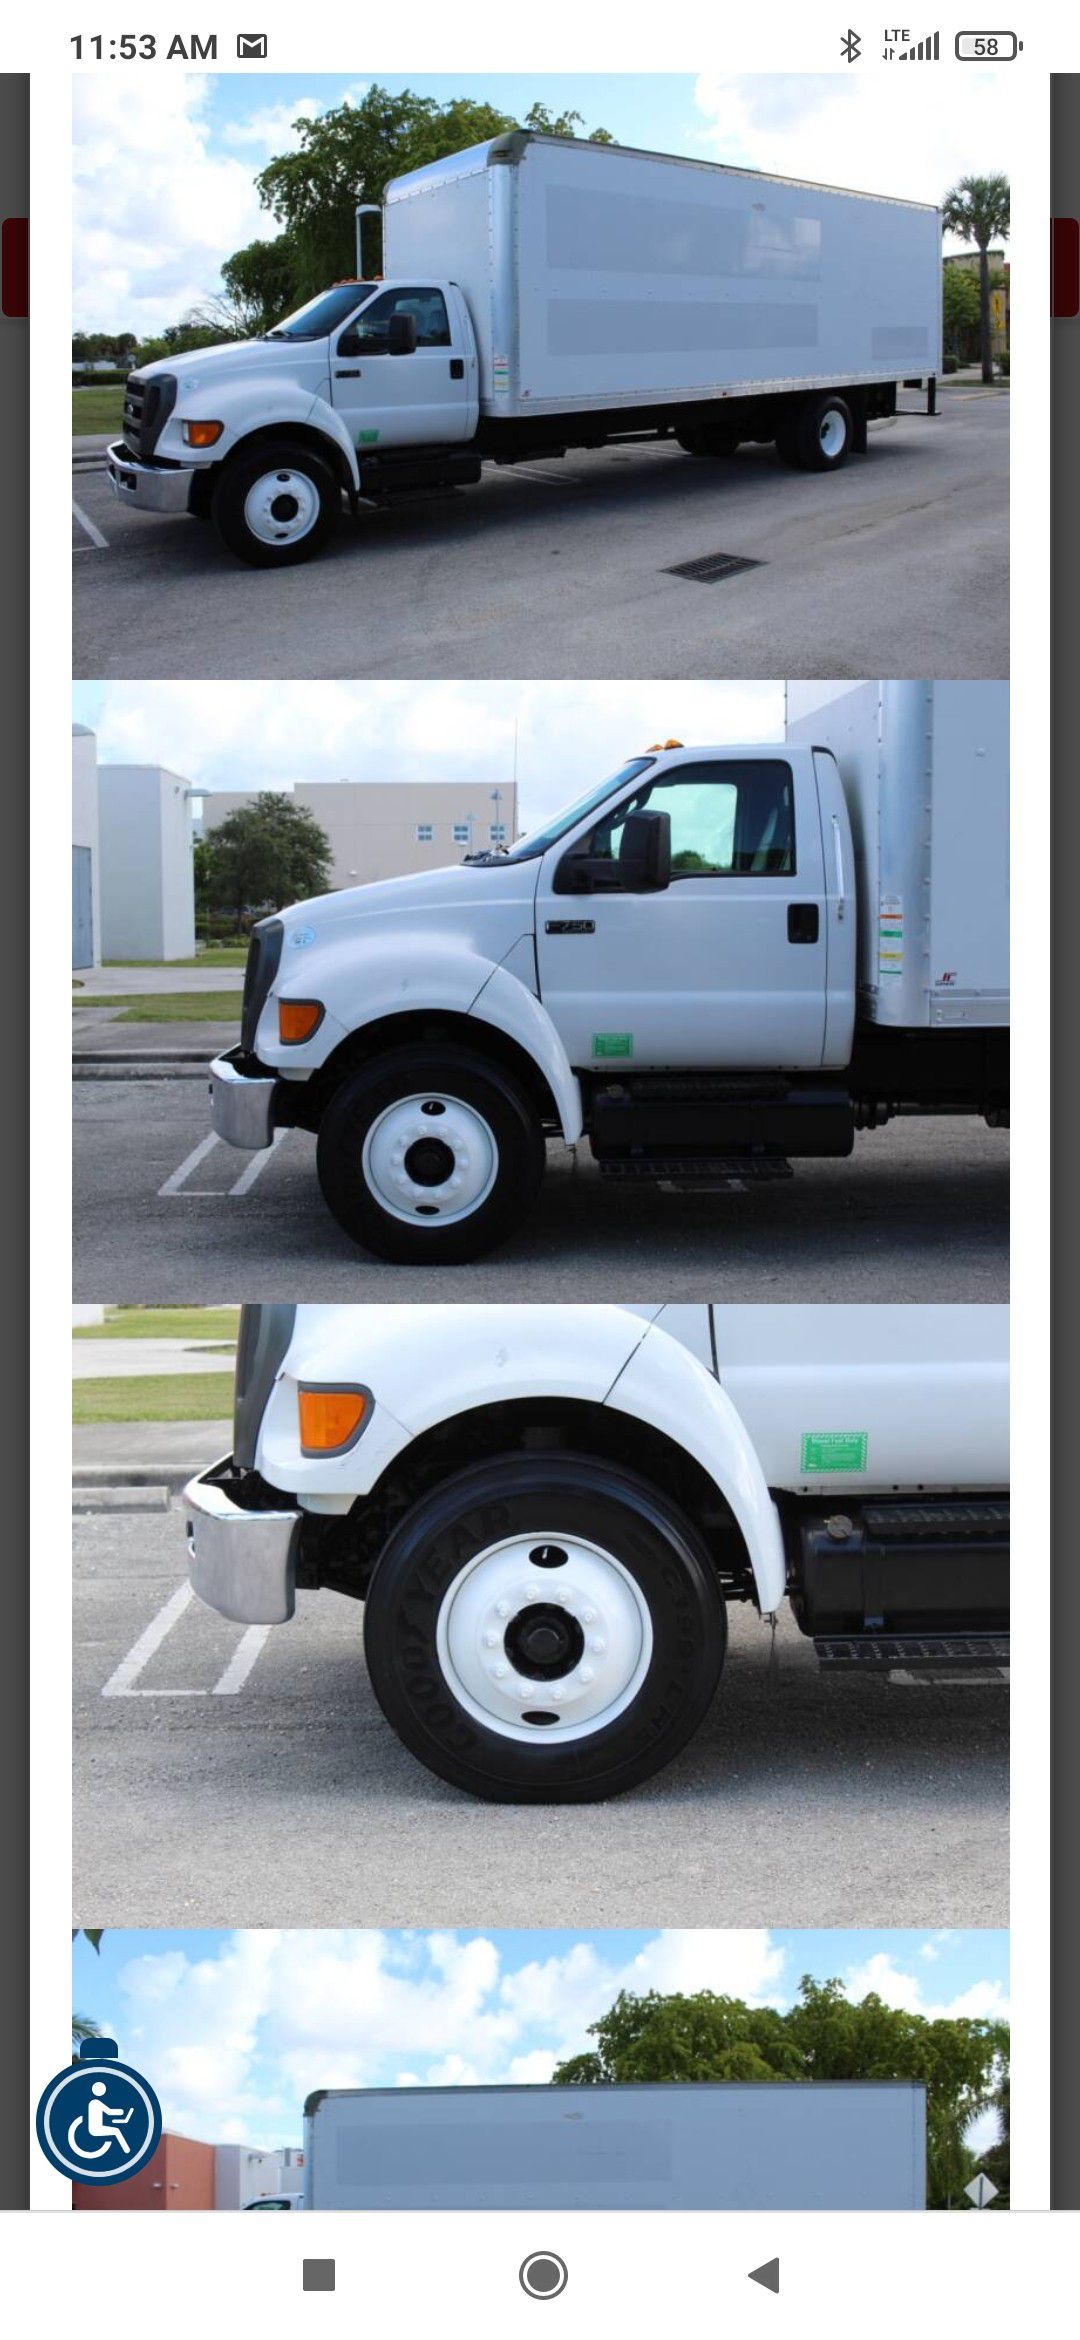 2012 FORD F750 AUTO AC 26FT BOX NON CDL CUMMINS DIESEL READY TO WORK UNIT FINANCING AVAILABLE INFO CONTACT OLIVER 305TRUCKGURU GETS YOU ROLLING!